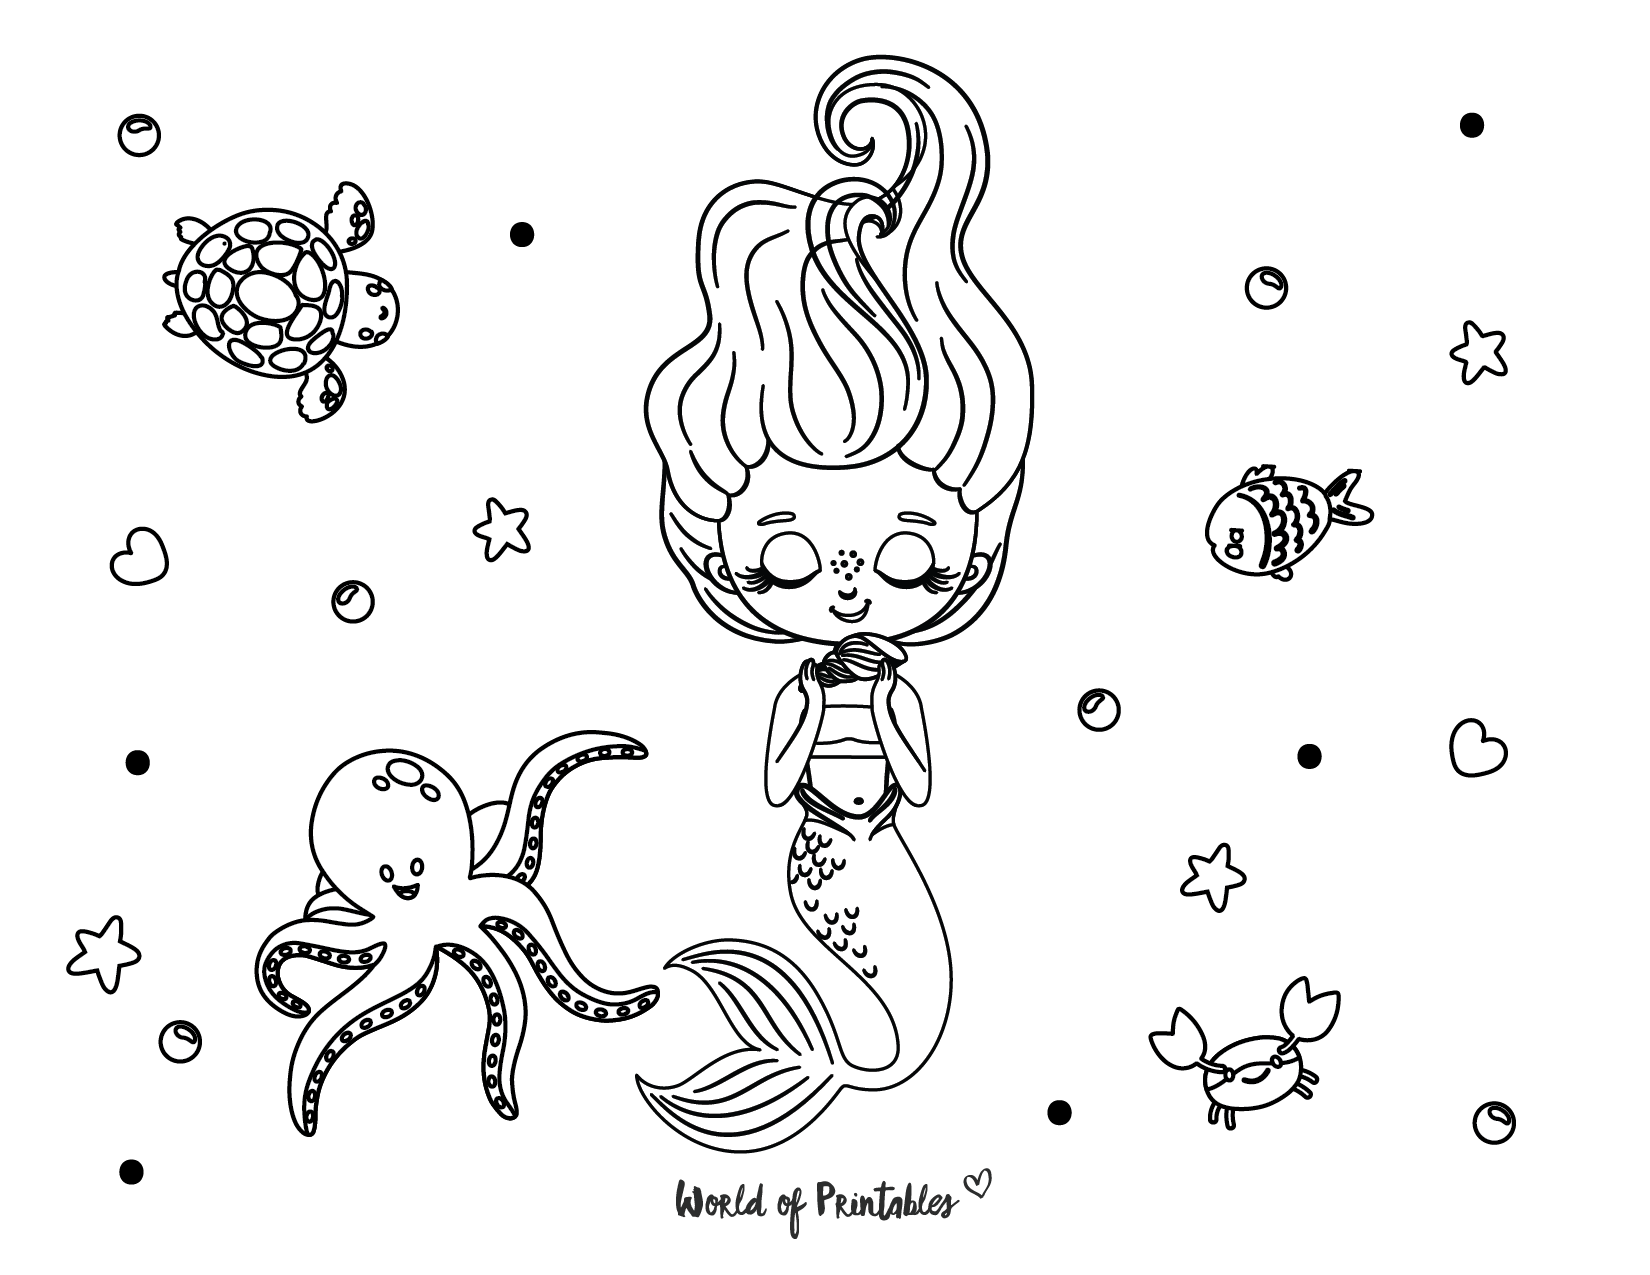 20 Best Mermaid Coloring Pages For Kids & Adults   World of Printables